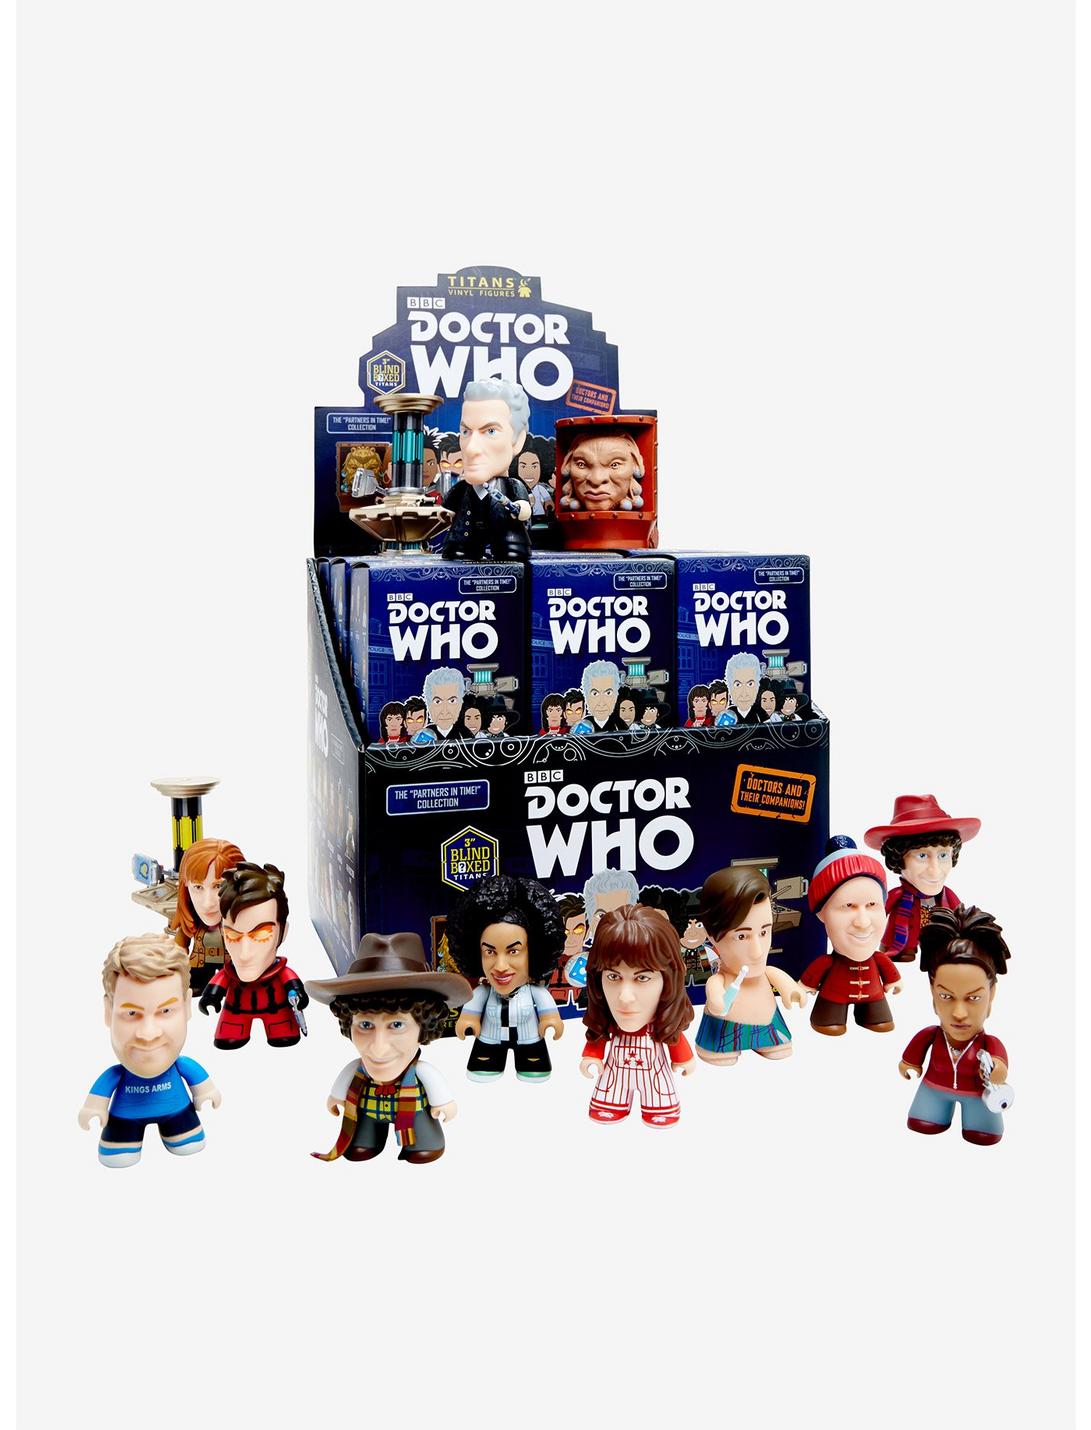 Doctor Who Partners In Time Collection Titans Blind Box Vinyl Figure, , hi-res